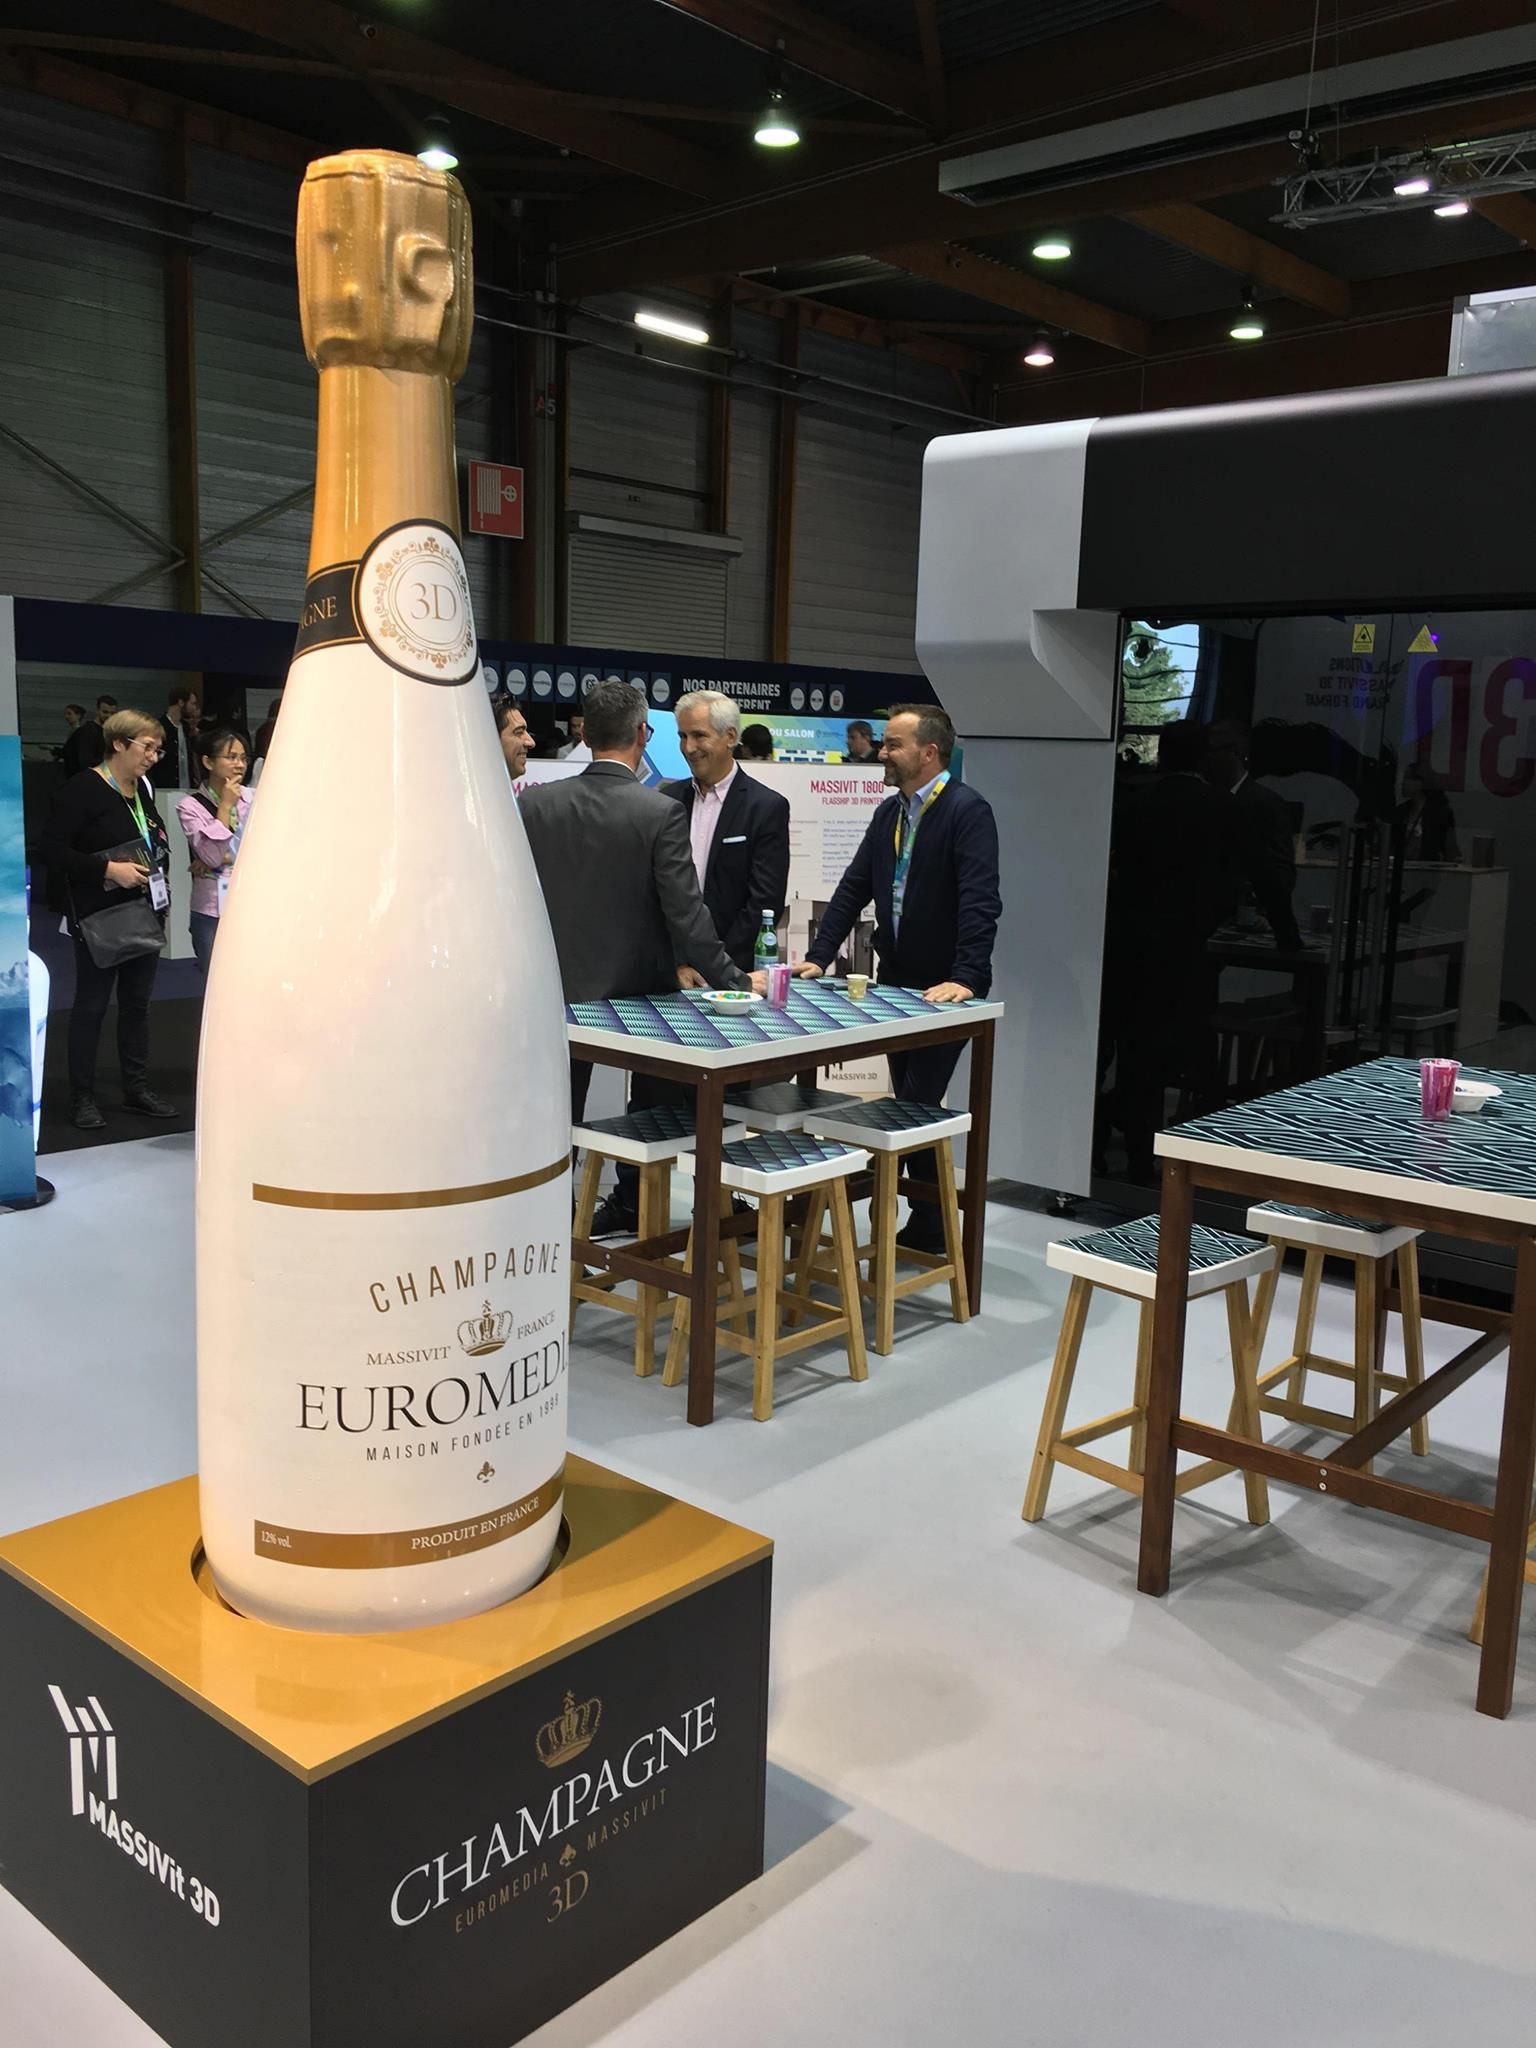 3D Printed Champagne Bottle